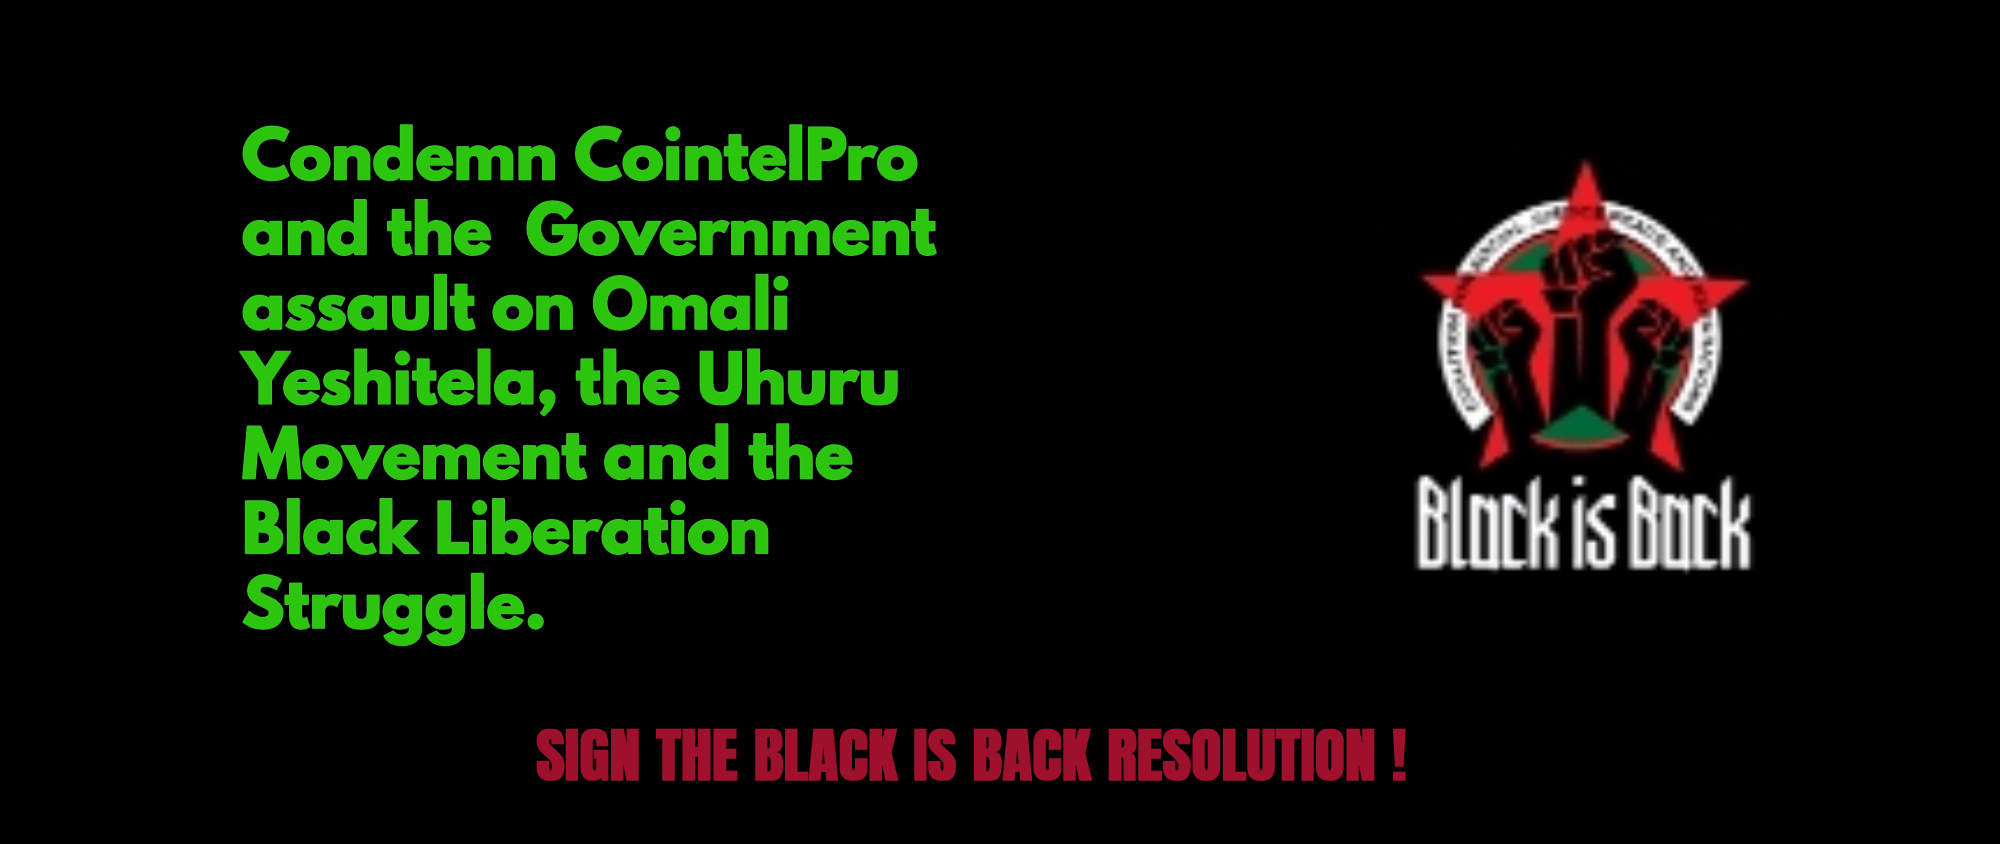 SIGN THE BLACK IS BACK RESOLUTION CONDEMNING THE FBI ATTACKS ON THE  UHURU MOVMENT